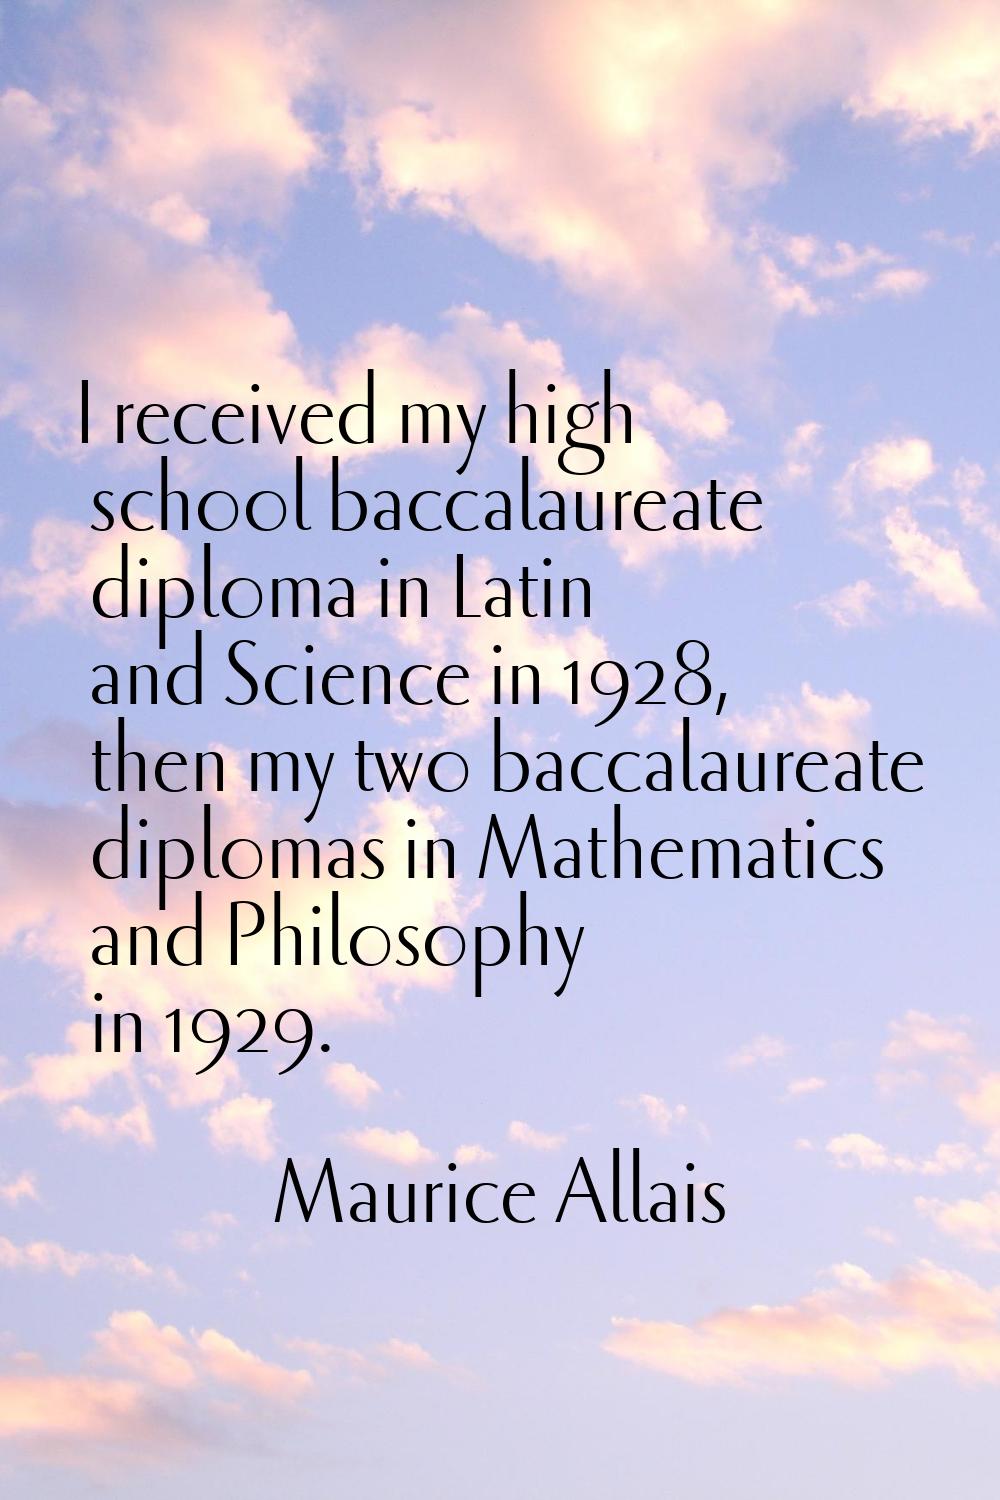 I received my high school baccalaureate diploma in Latin and Science in 1928, then my two baccalaur